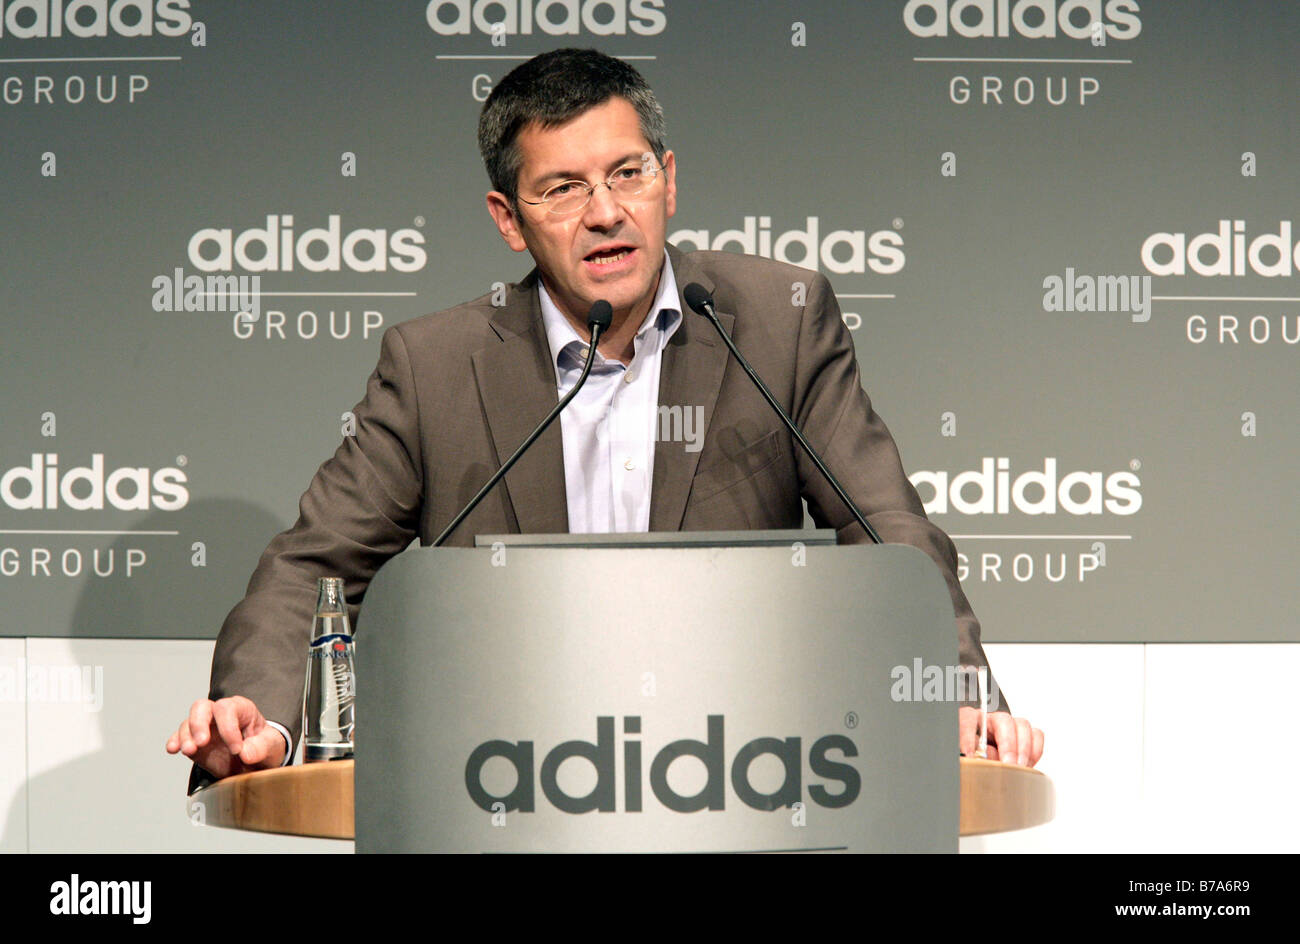 Herbert Hainer, chairman of the Adidas AG, at the press conference on financial statements on the 05.03.2008 in Herzogenaurach, Stock Photo